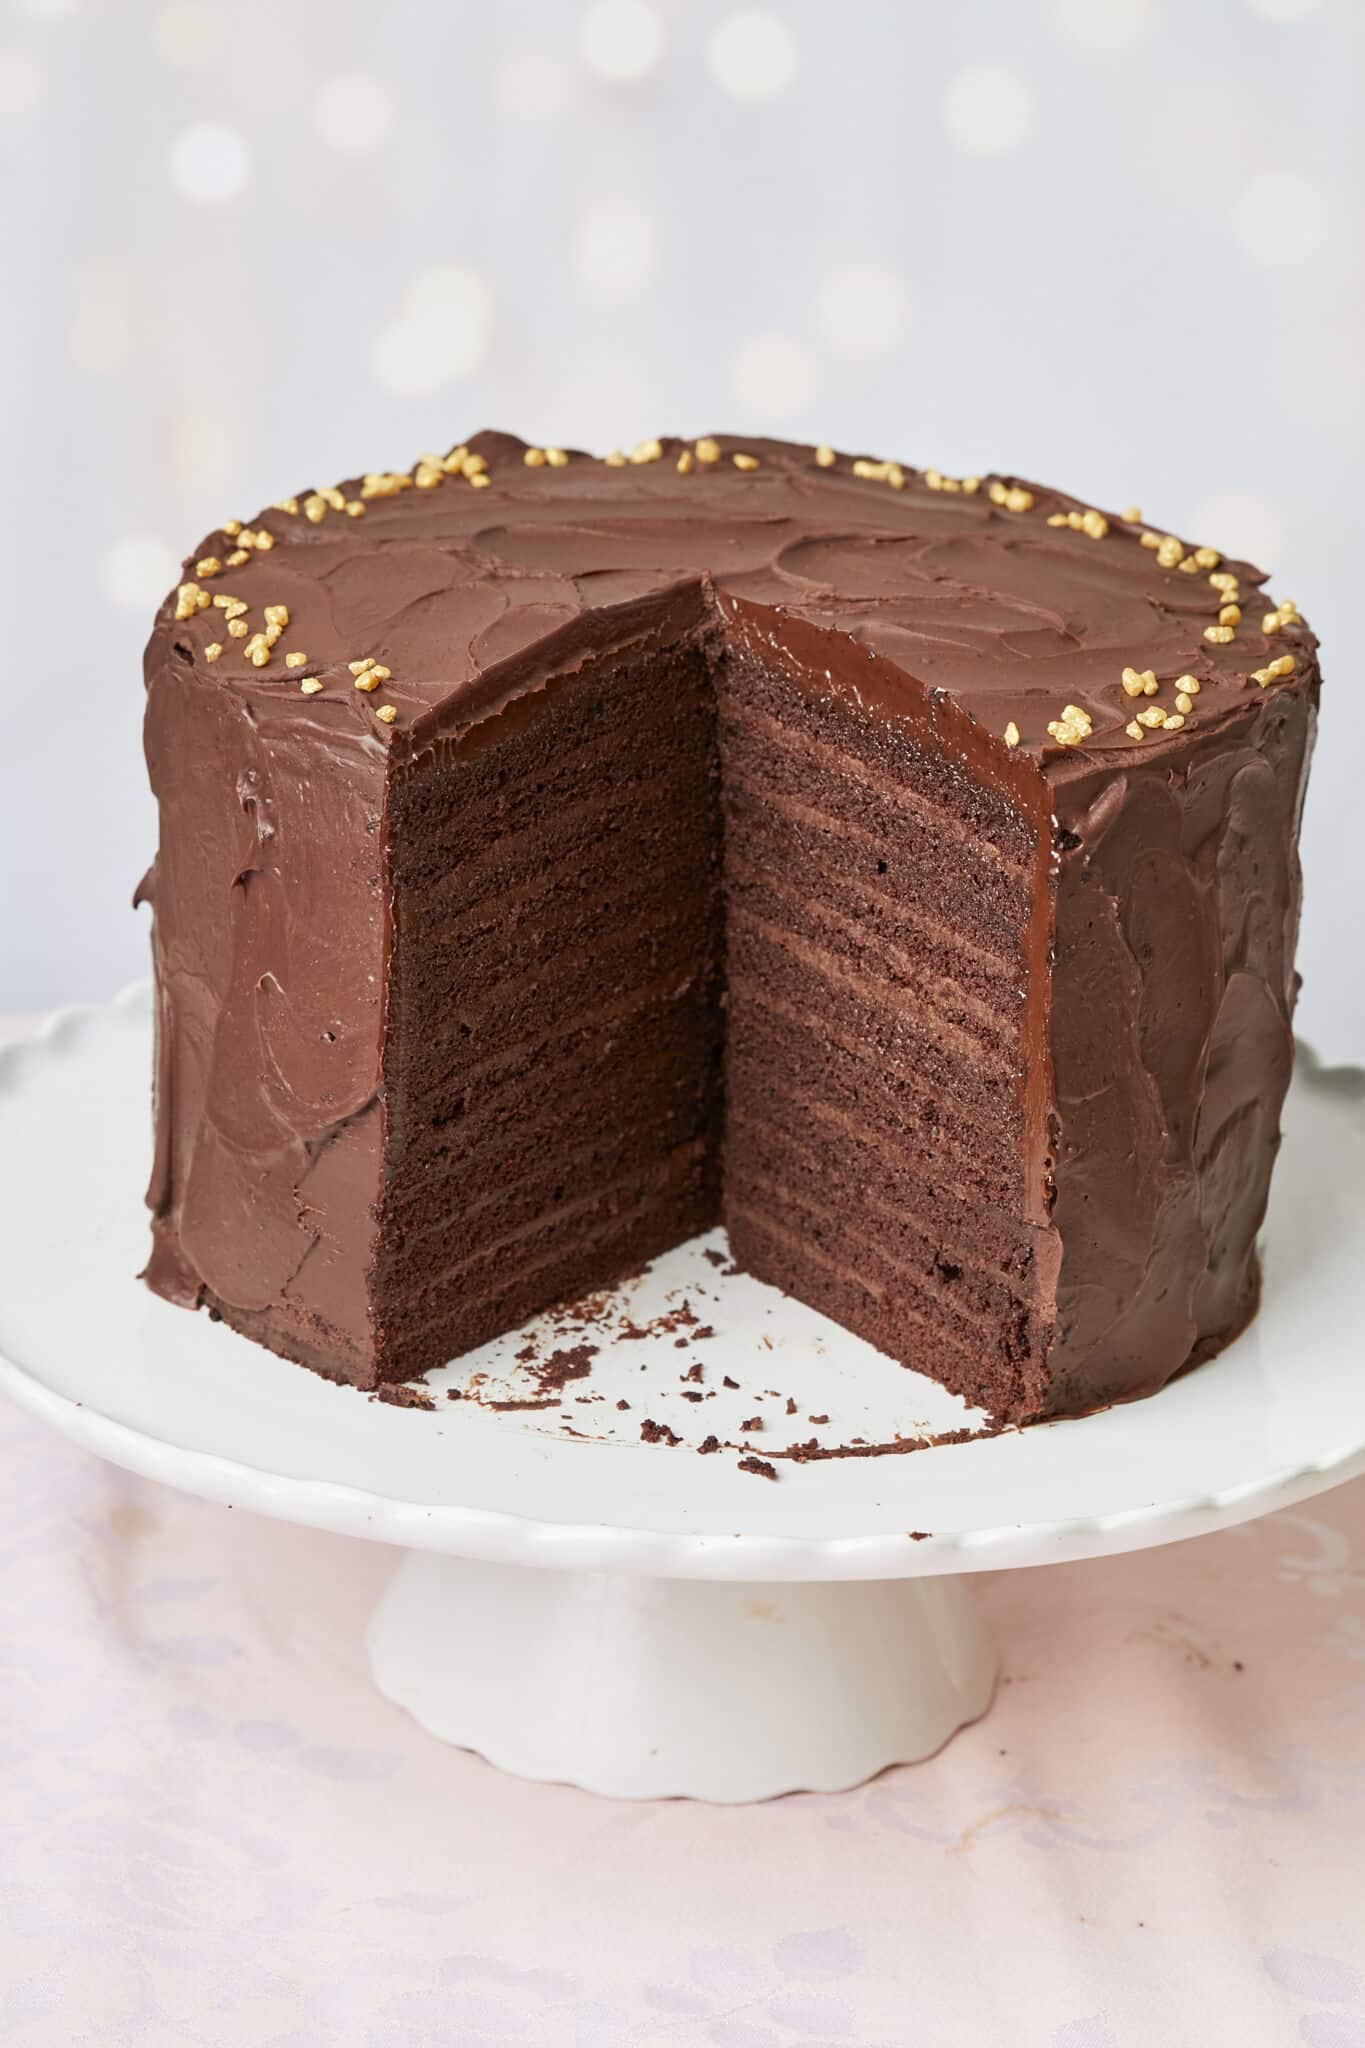 A generous slice of the 24-Layer Chocolate Cake has been cut off from the whole cake. A close-up shot shows its moist and soft crumb and silky smooth ganache on the outside and decadent chocolate pastry cream between the layers. 